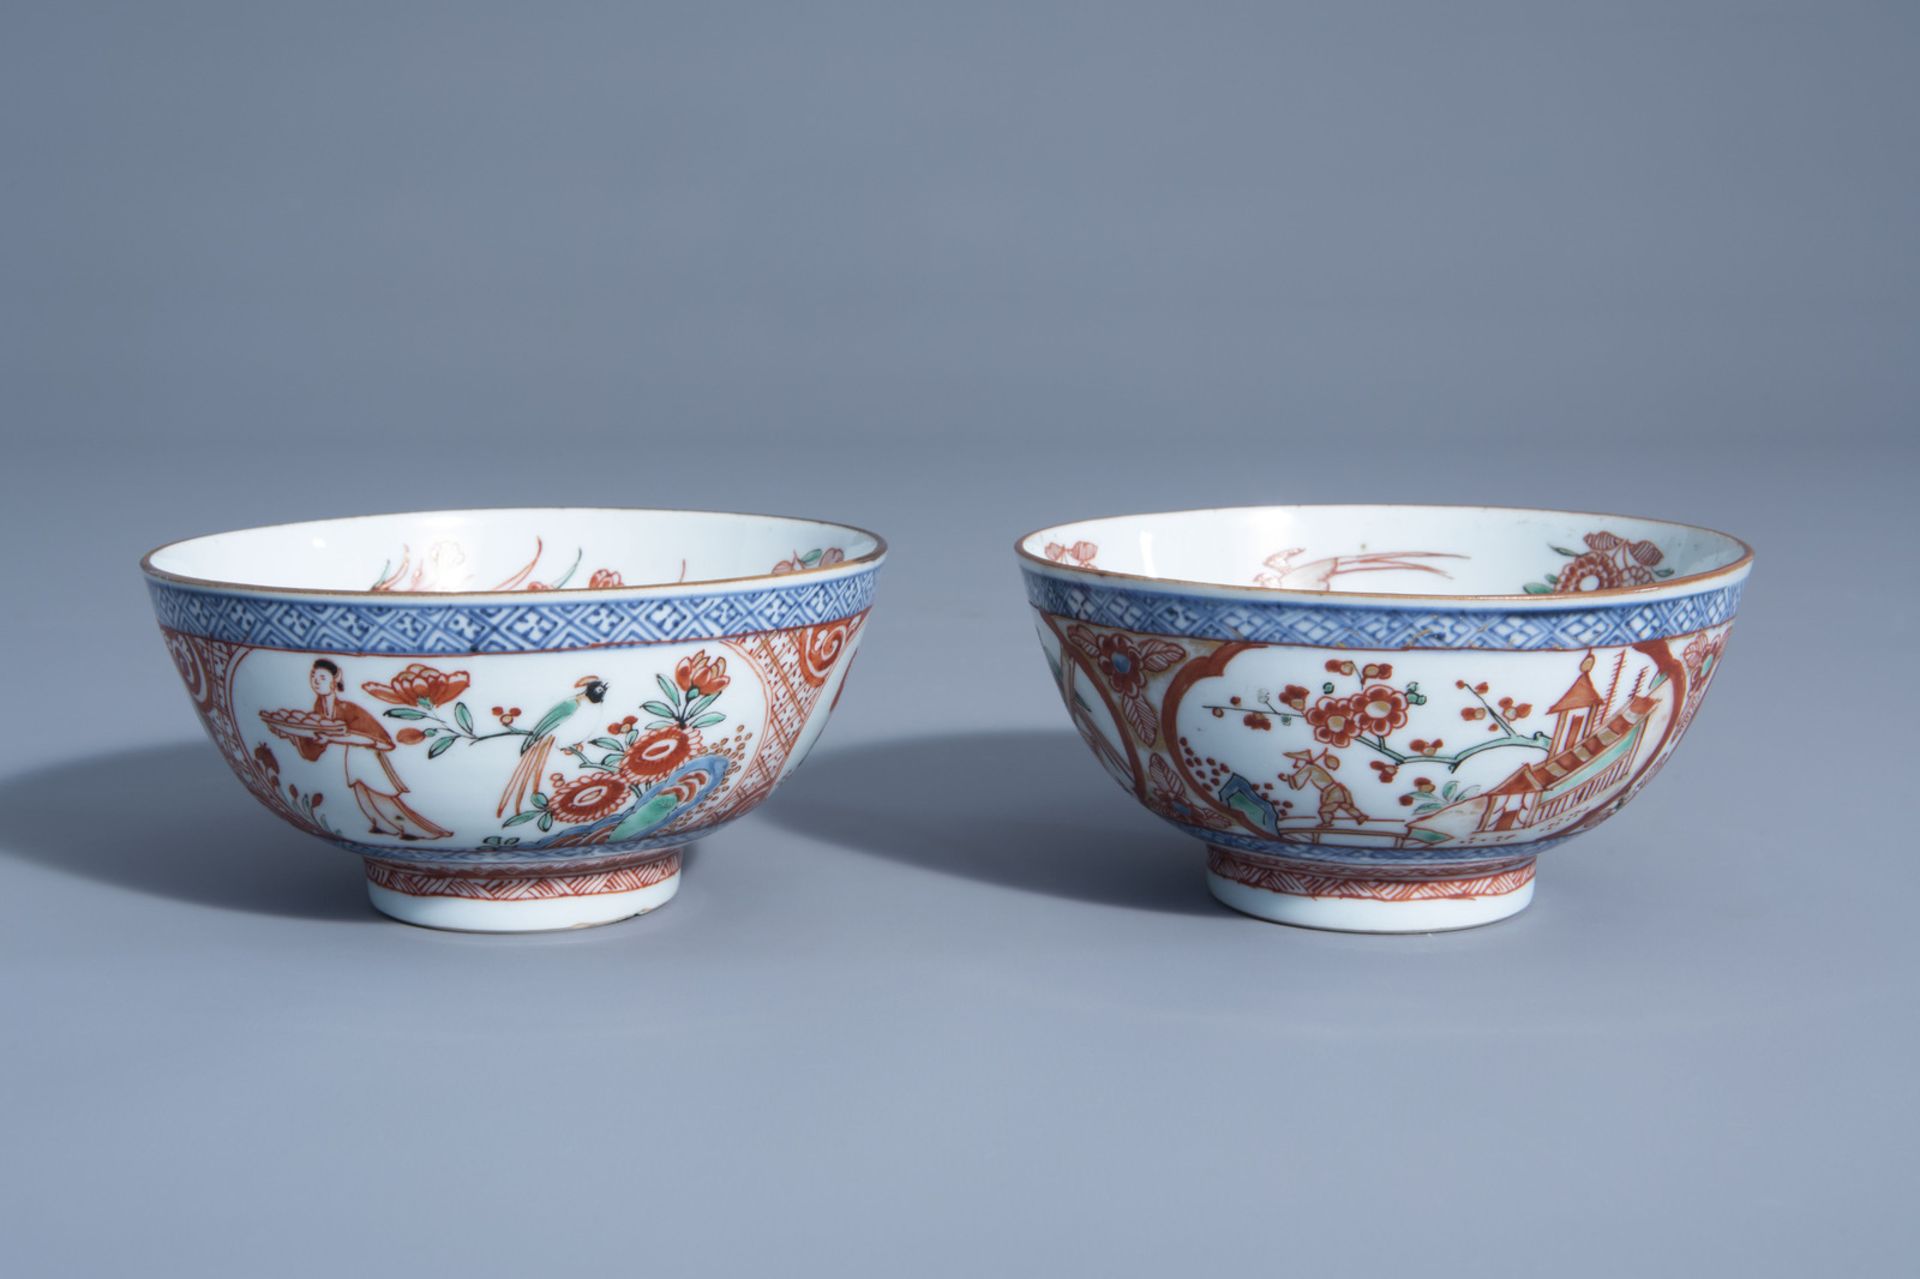 Two Dutch-decorated 'Amsterdams bont' blue and white Chinese bowls, Kangxi